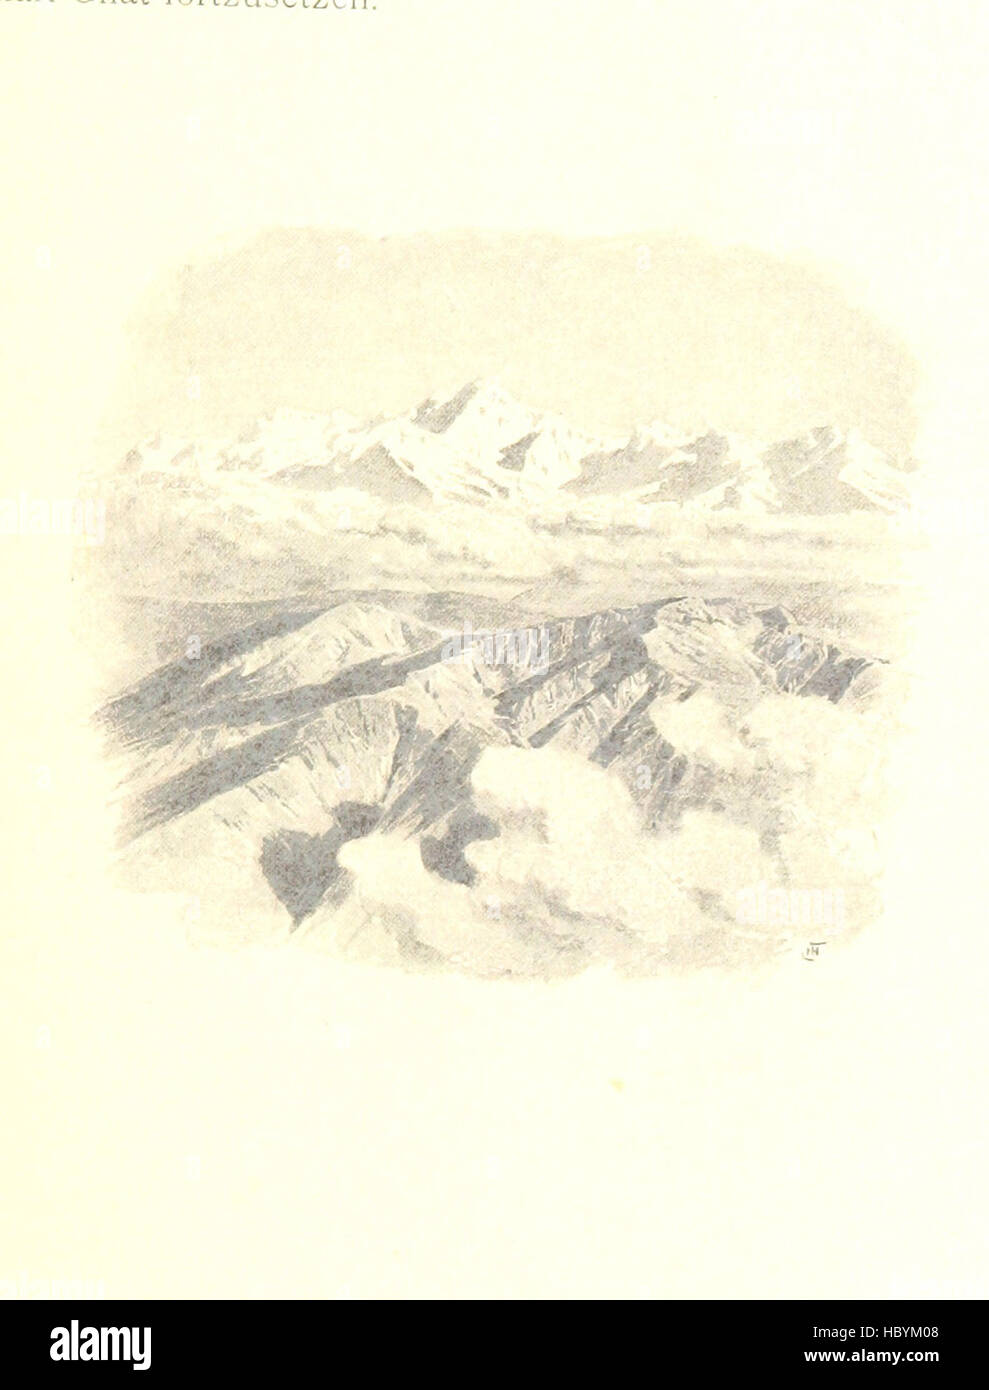 Image taken from page 215 of 'Tagebuch meiner Reise um die Erd. 1892-1893' Image taken from page 215 of 'Tagebuch meiner Reise um Stock Photo